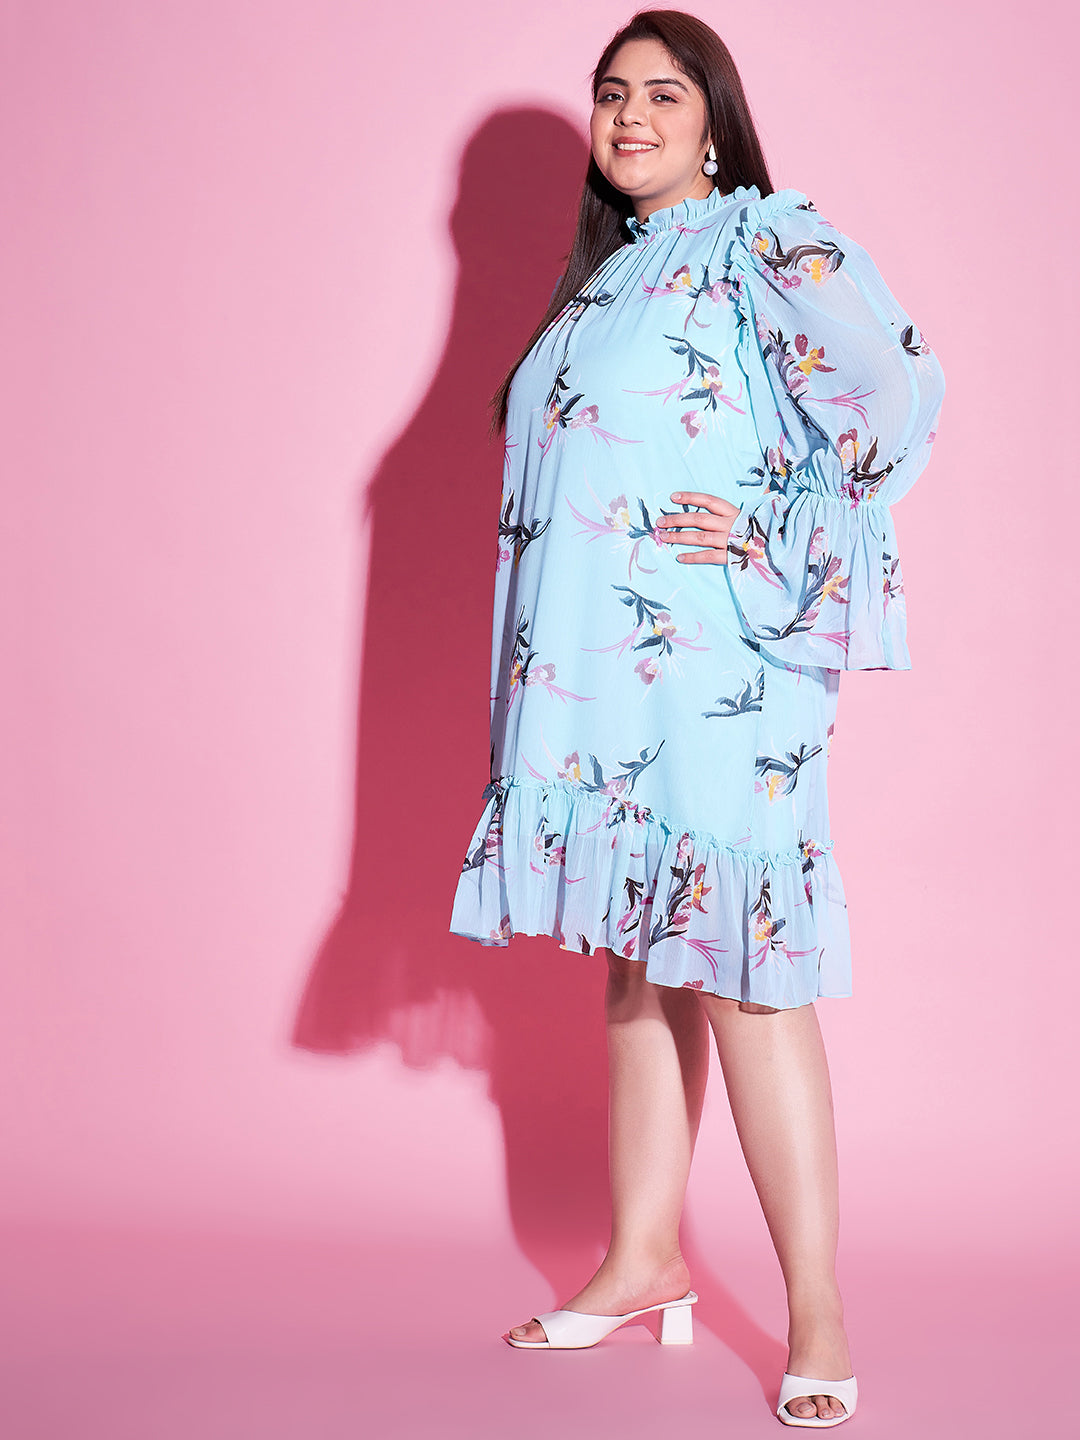 Athena Ample Plus Size Floral Printed Bell Sleeves Ruffled A-Line Dress - Athena Lifestyle